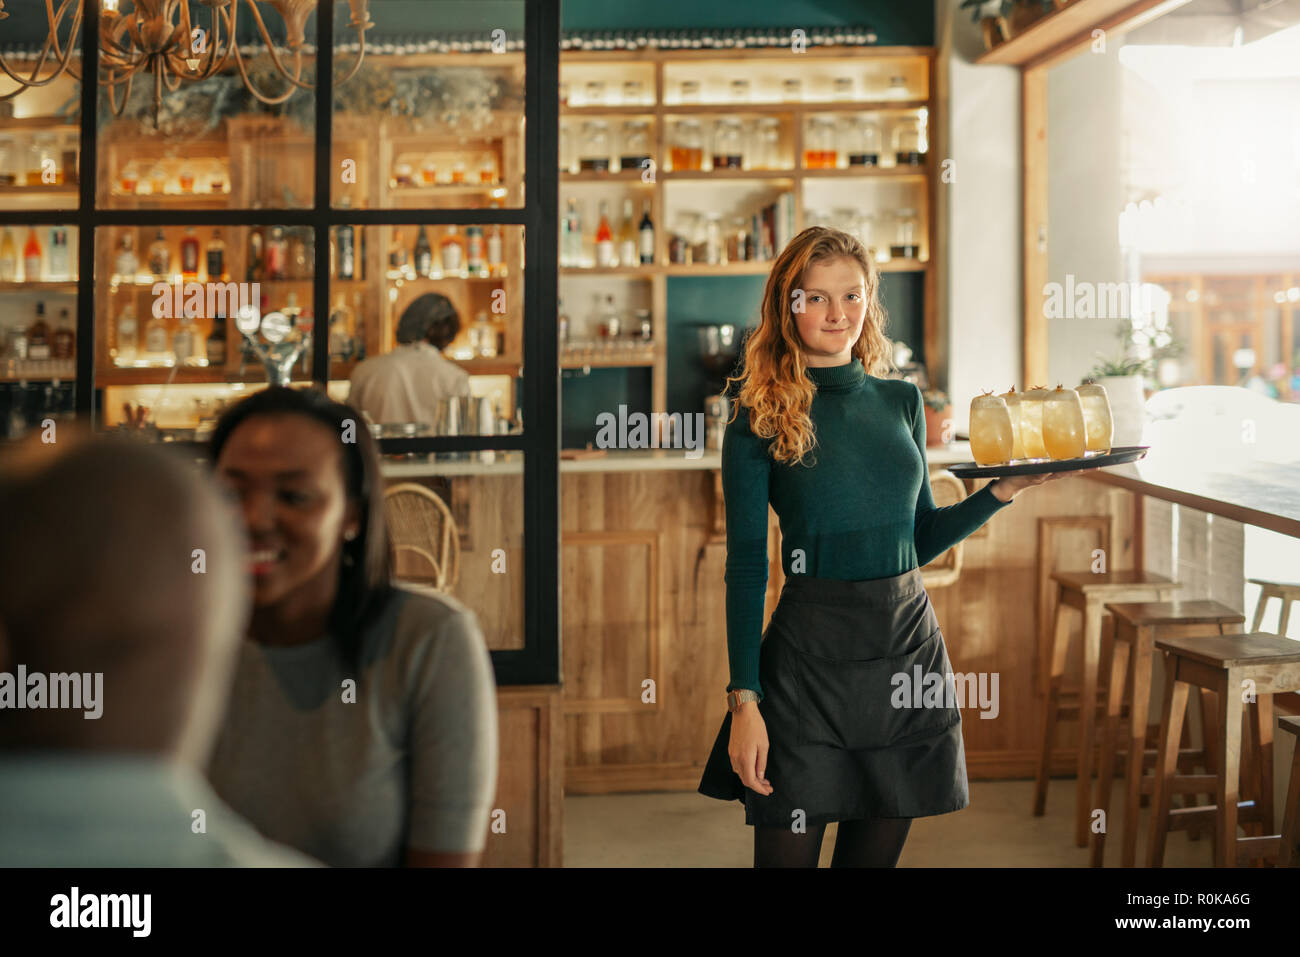 Smiling bar waitress standing with a tray of drinks Stock Photo